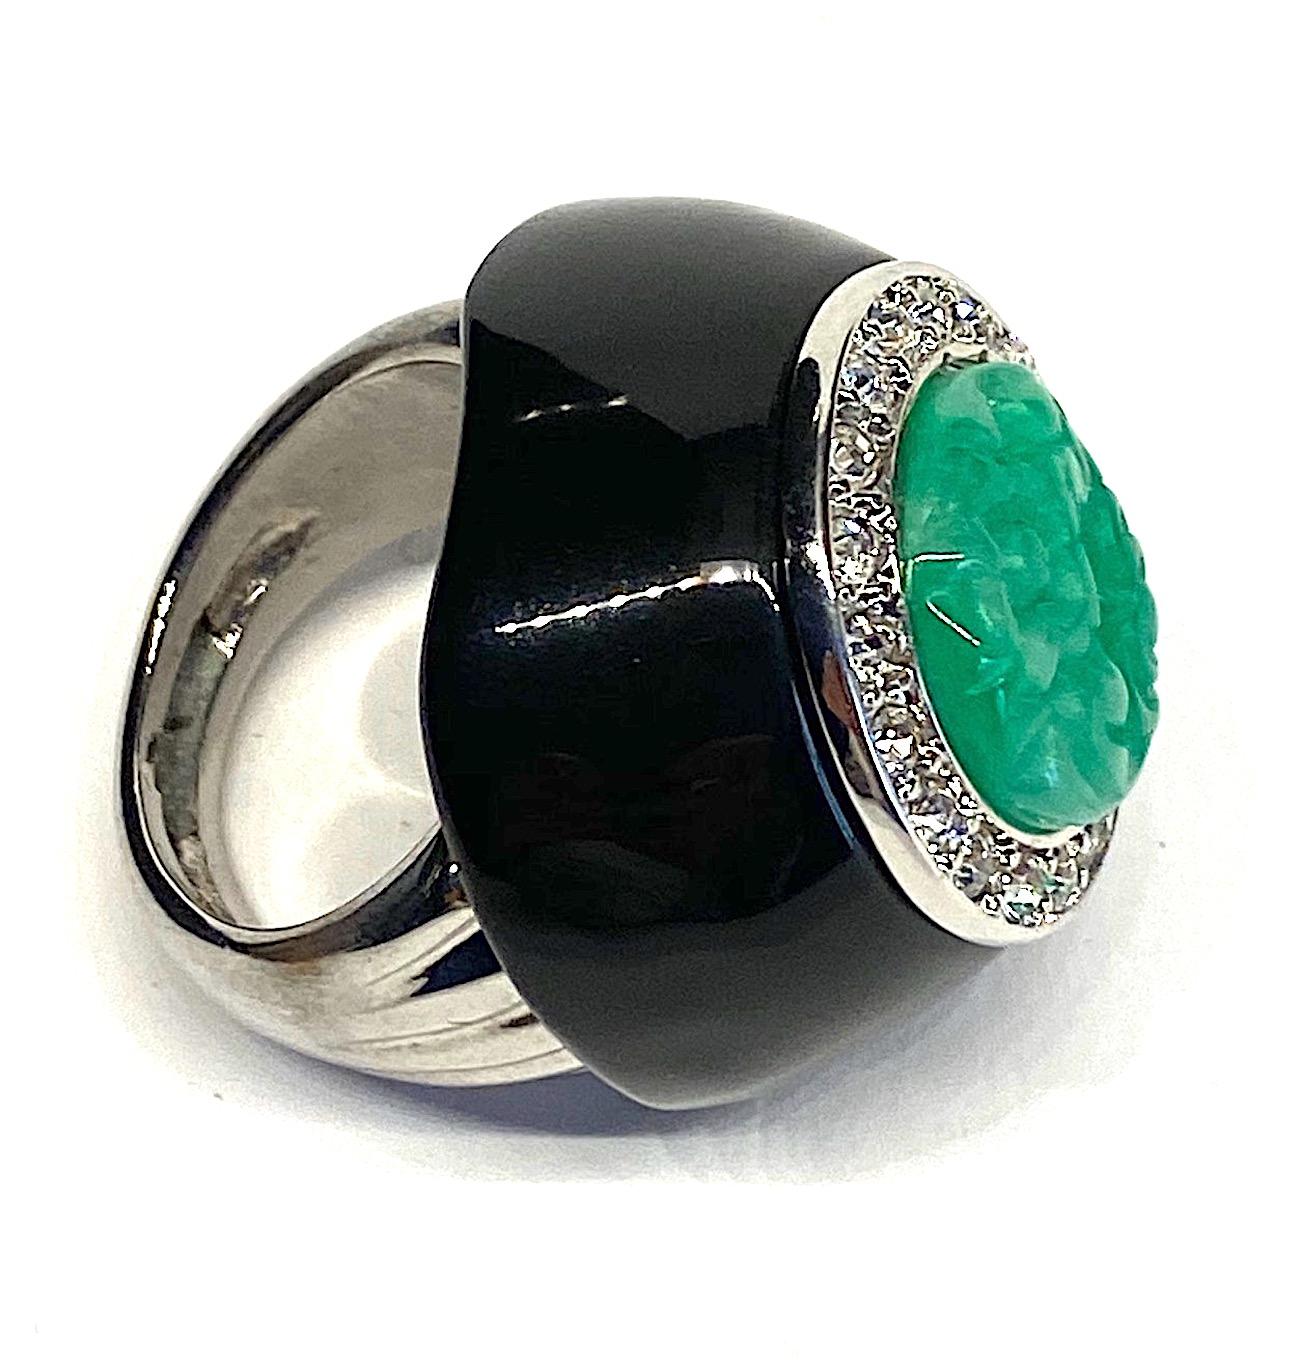 Kenneth Jay Lane 1980s Art Deco Black & Green Dome Ring 3